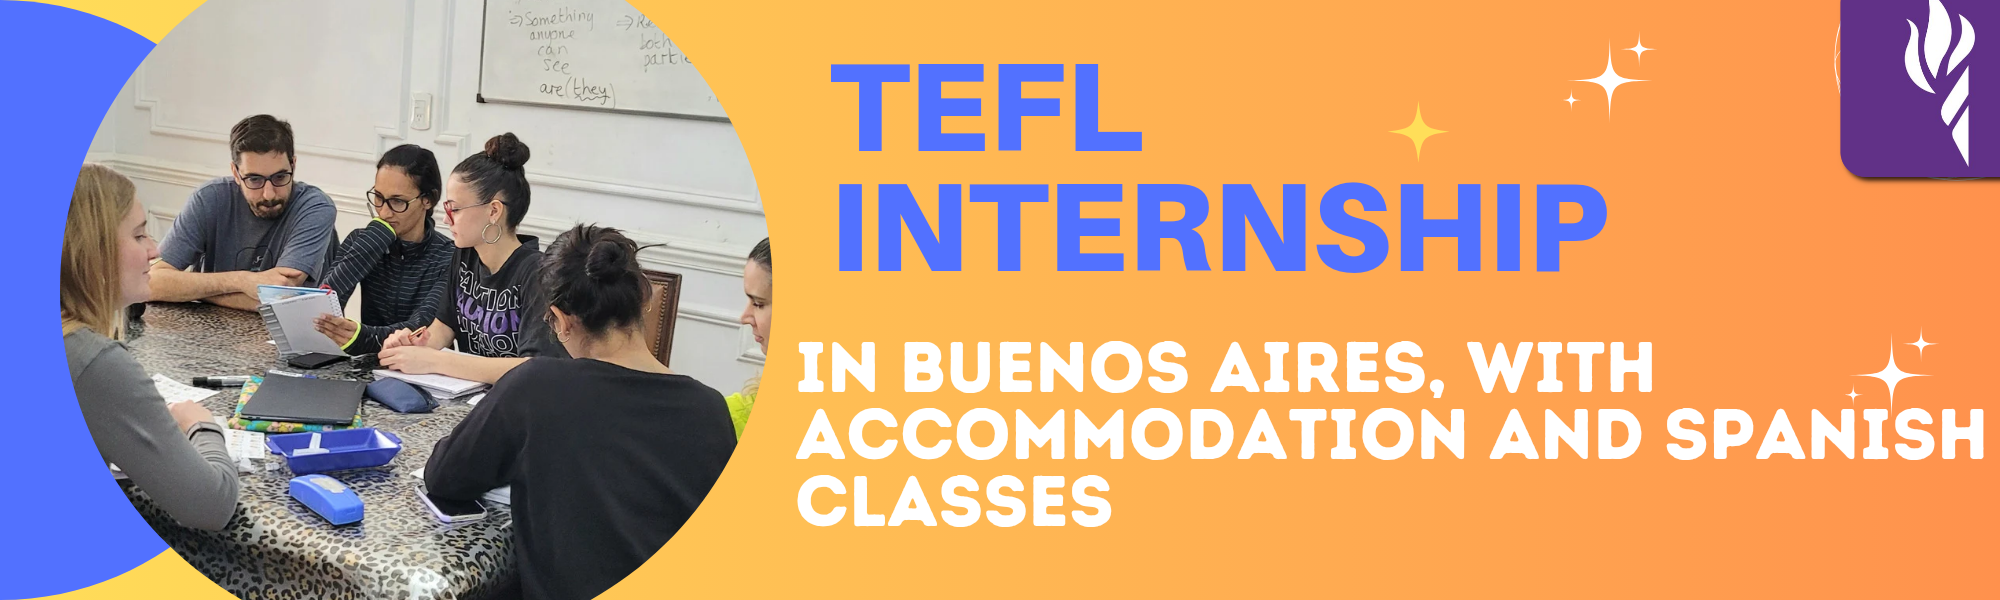 Img TEFL Internship in Buenos Aires with Spanish classes and Accommodation